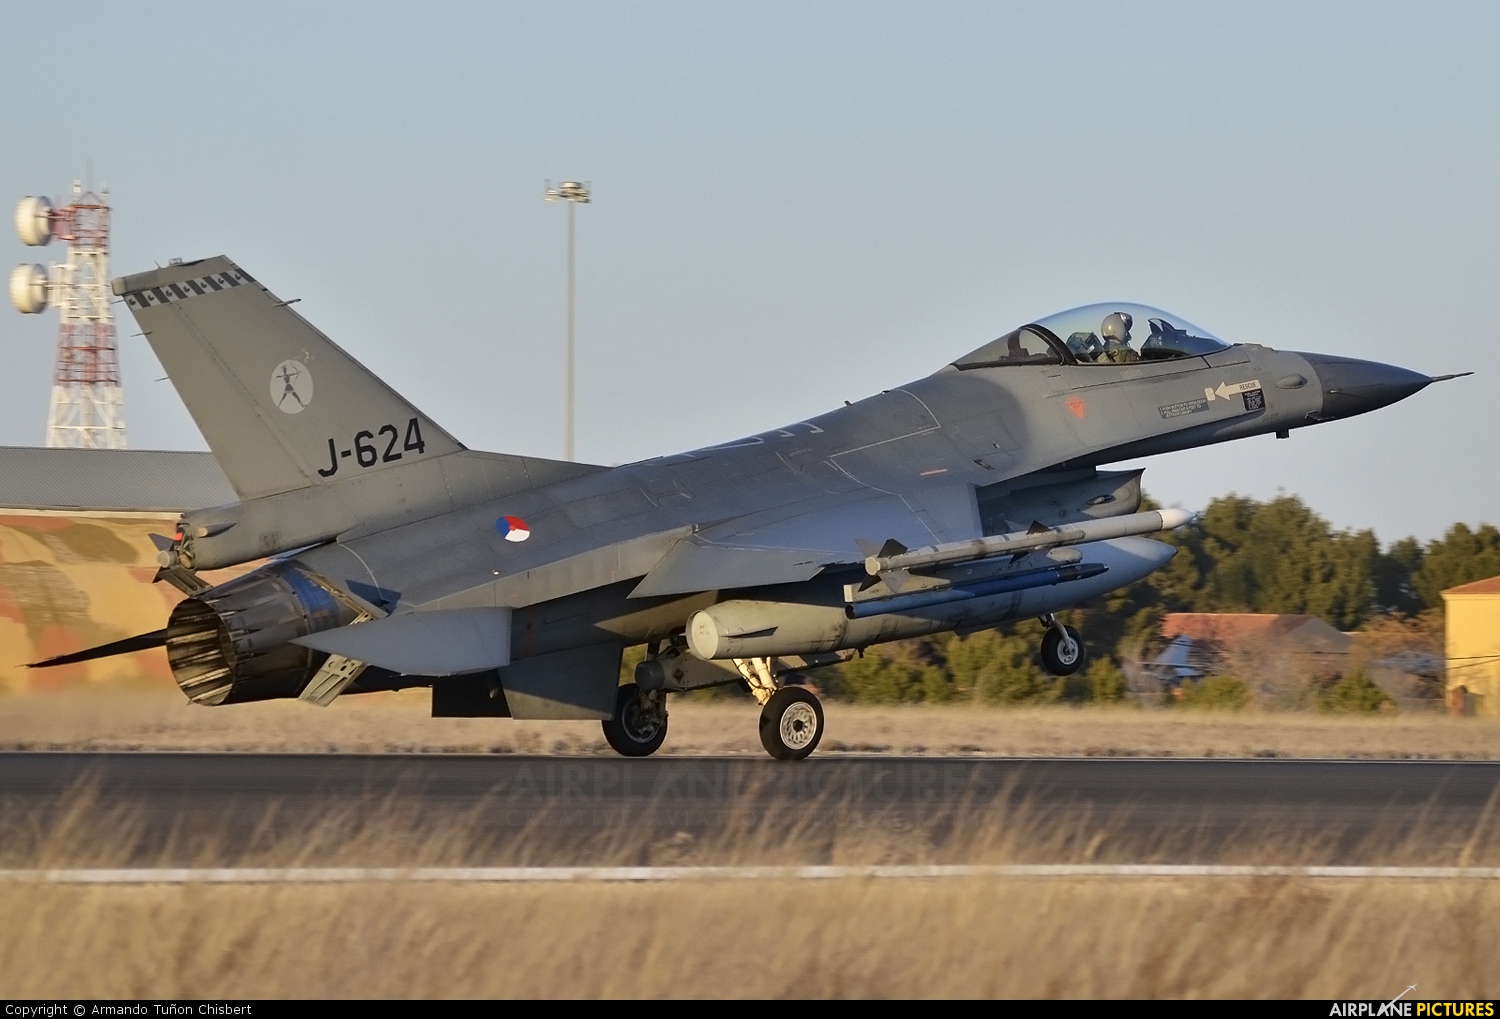 Netherlands - Air Force J-624 aircraft at Albacete